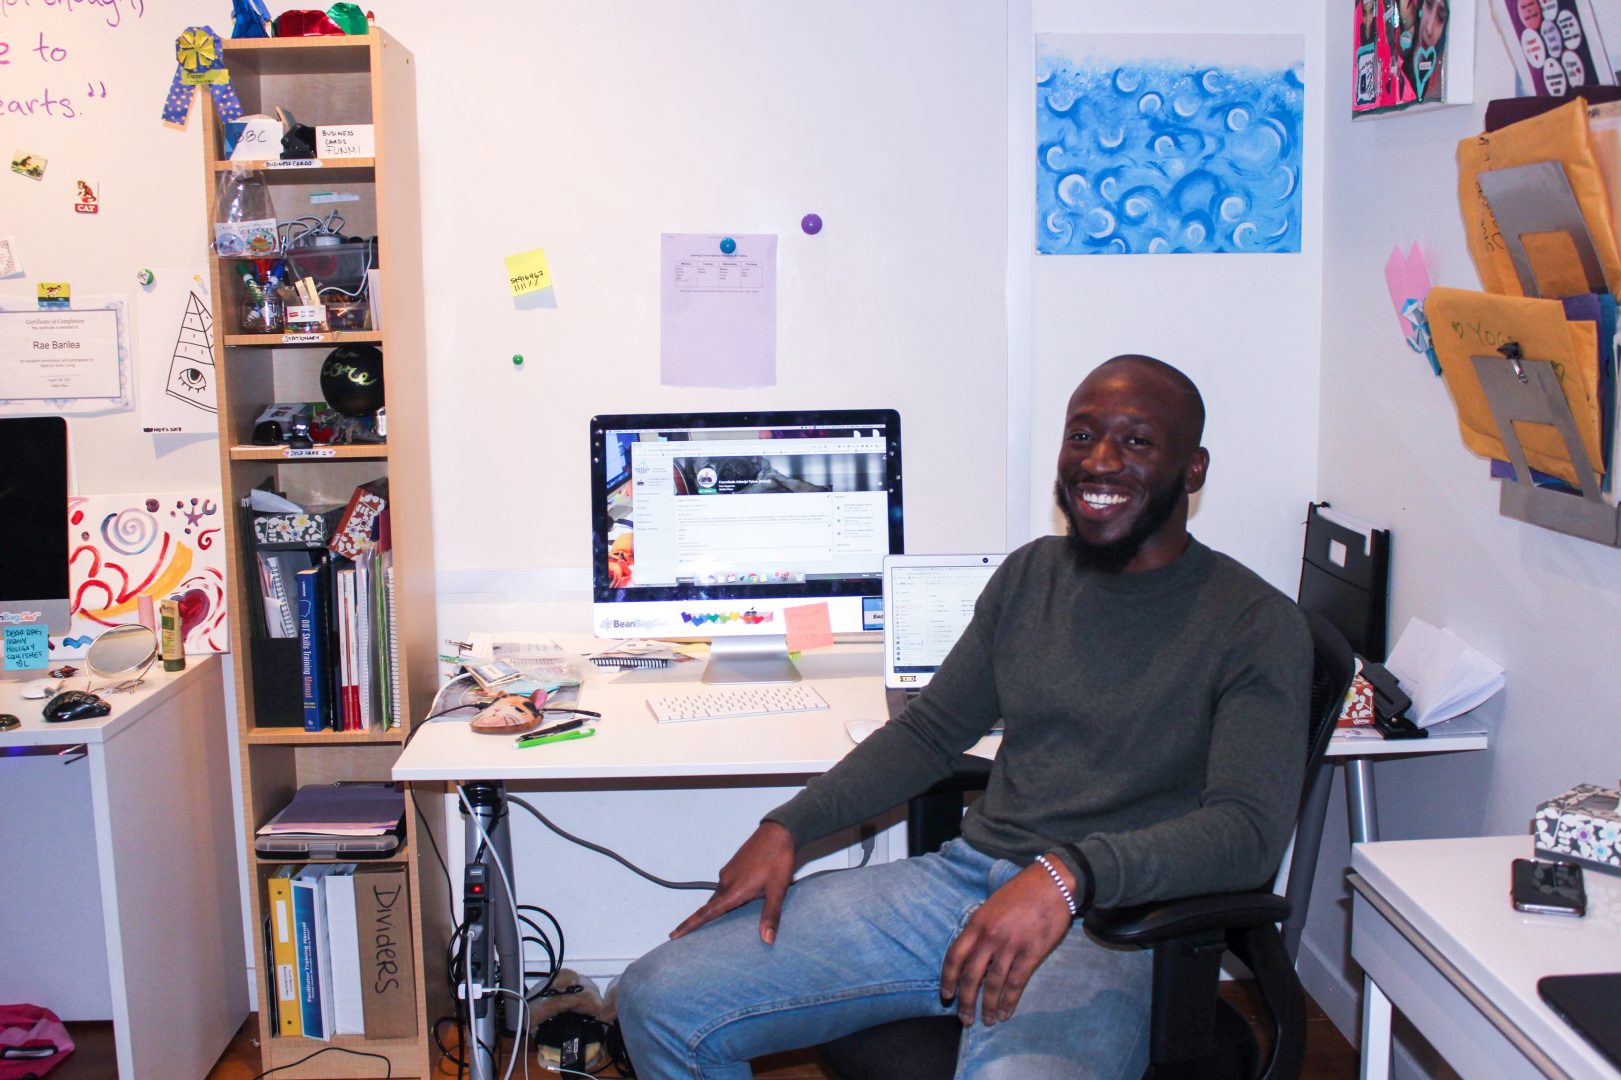 A portrait of staff member Funmi, who is sitting down at a desk with a computer, with lots of knick knacks, artwork and papers covering office walls.